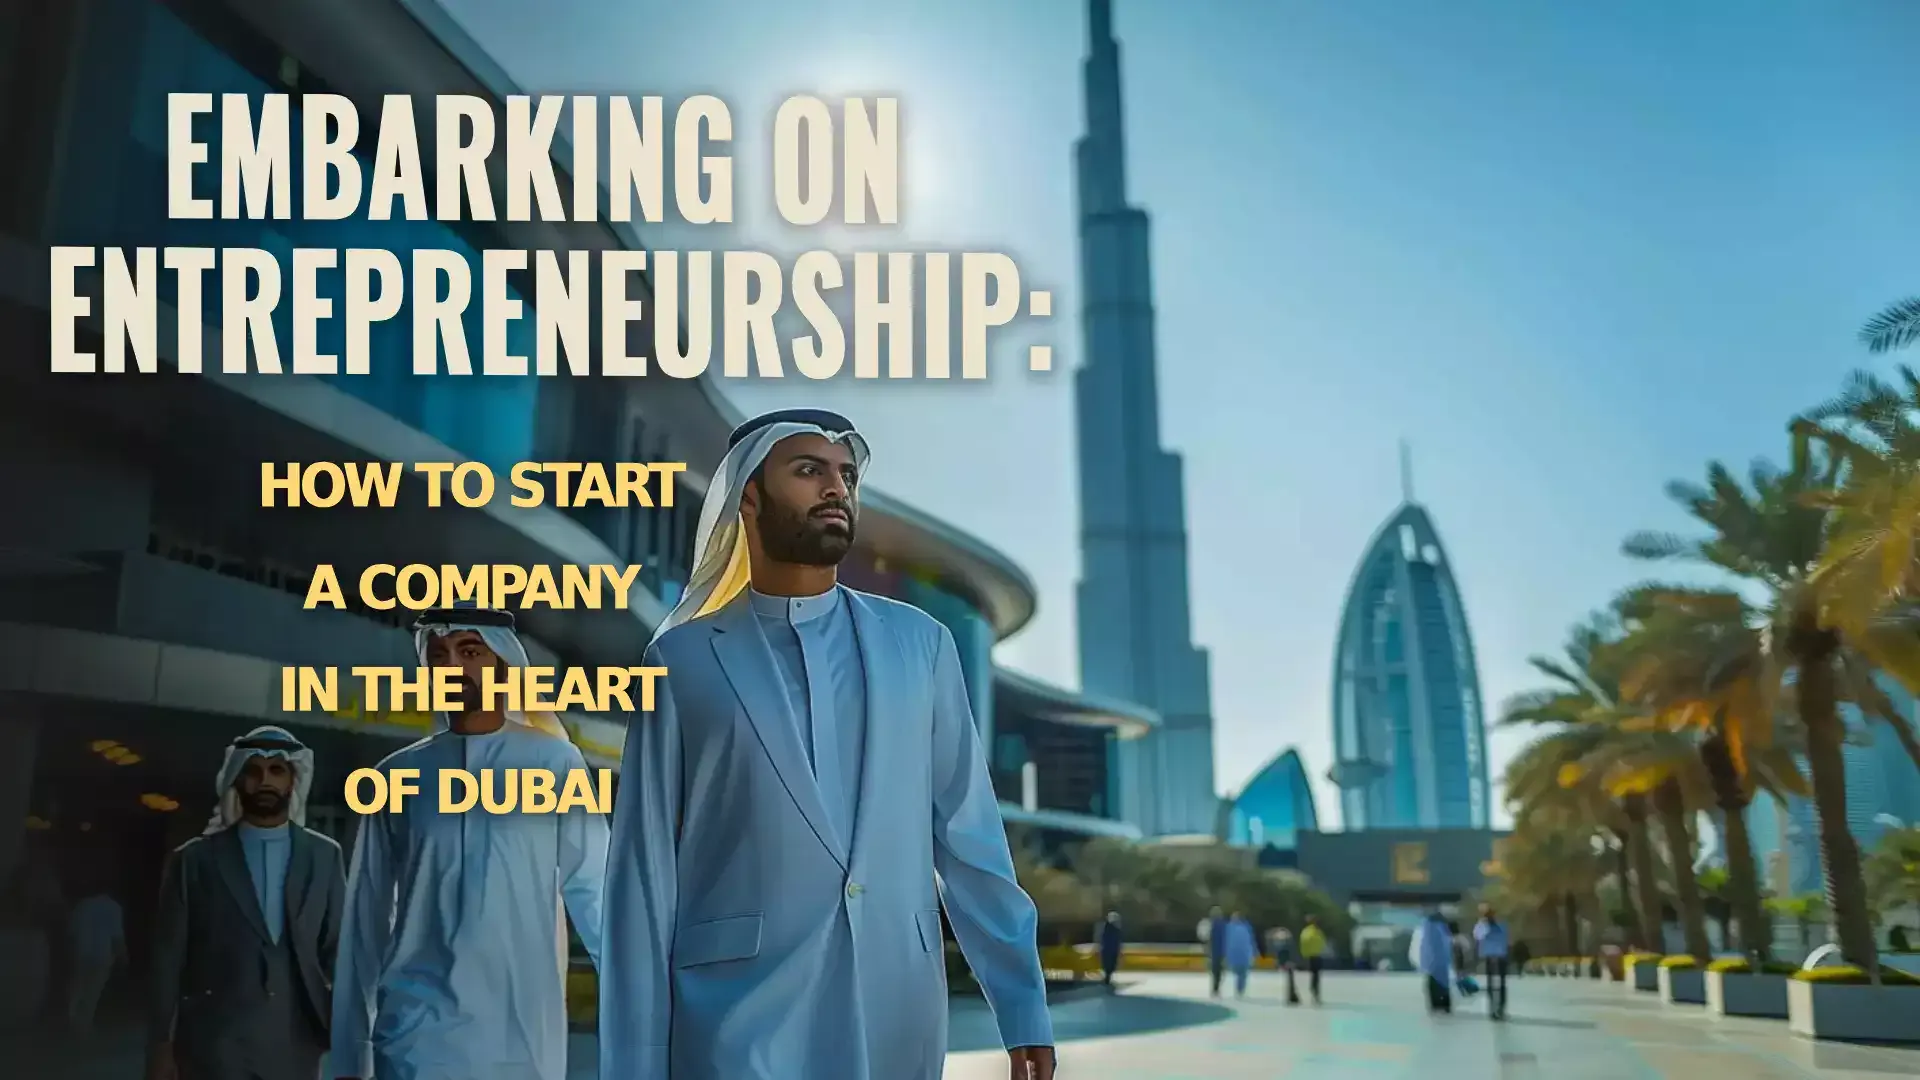 Graphic illustrating the process of setting up a company in Dubai